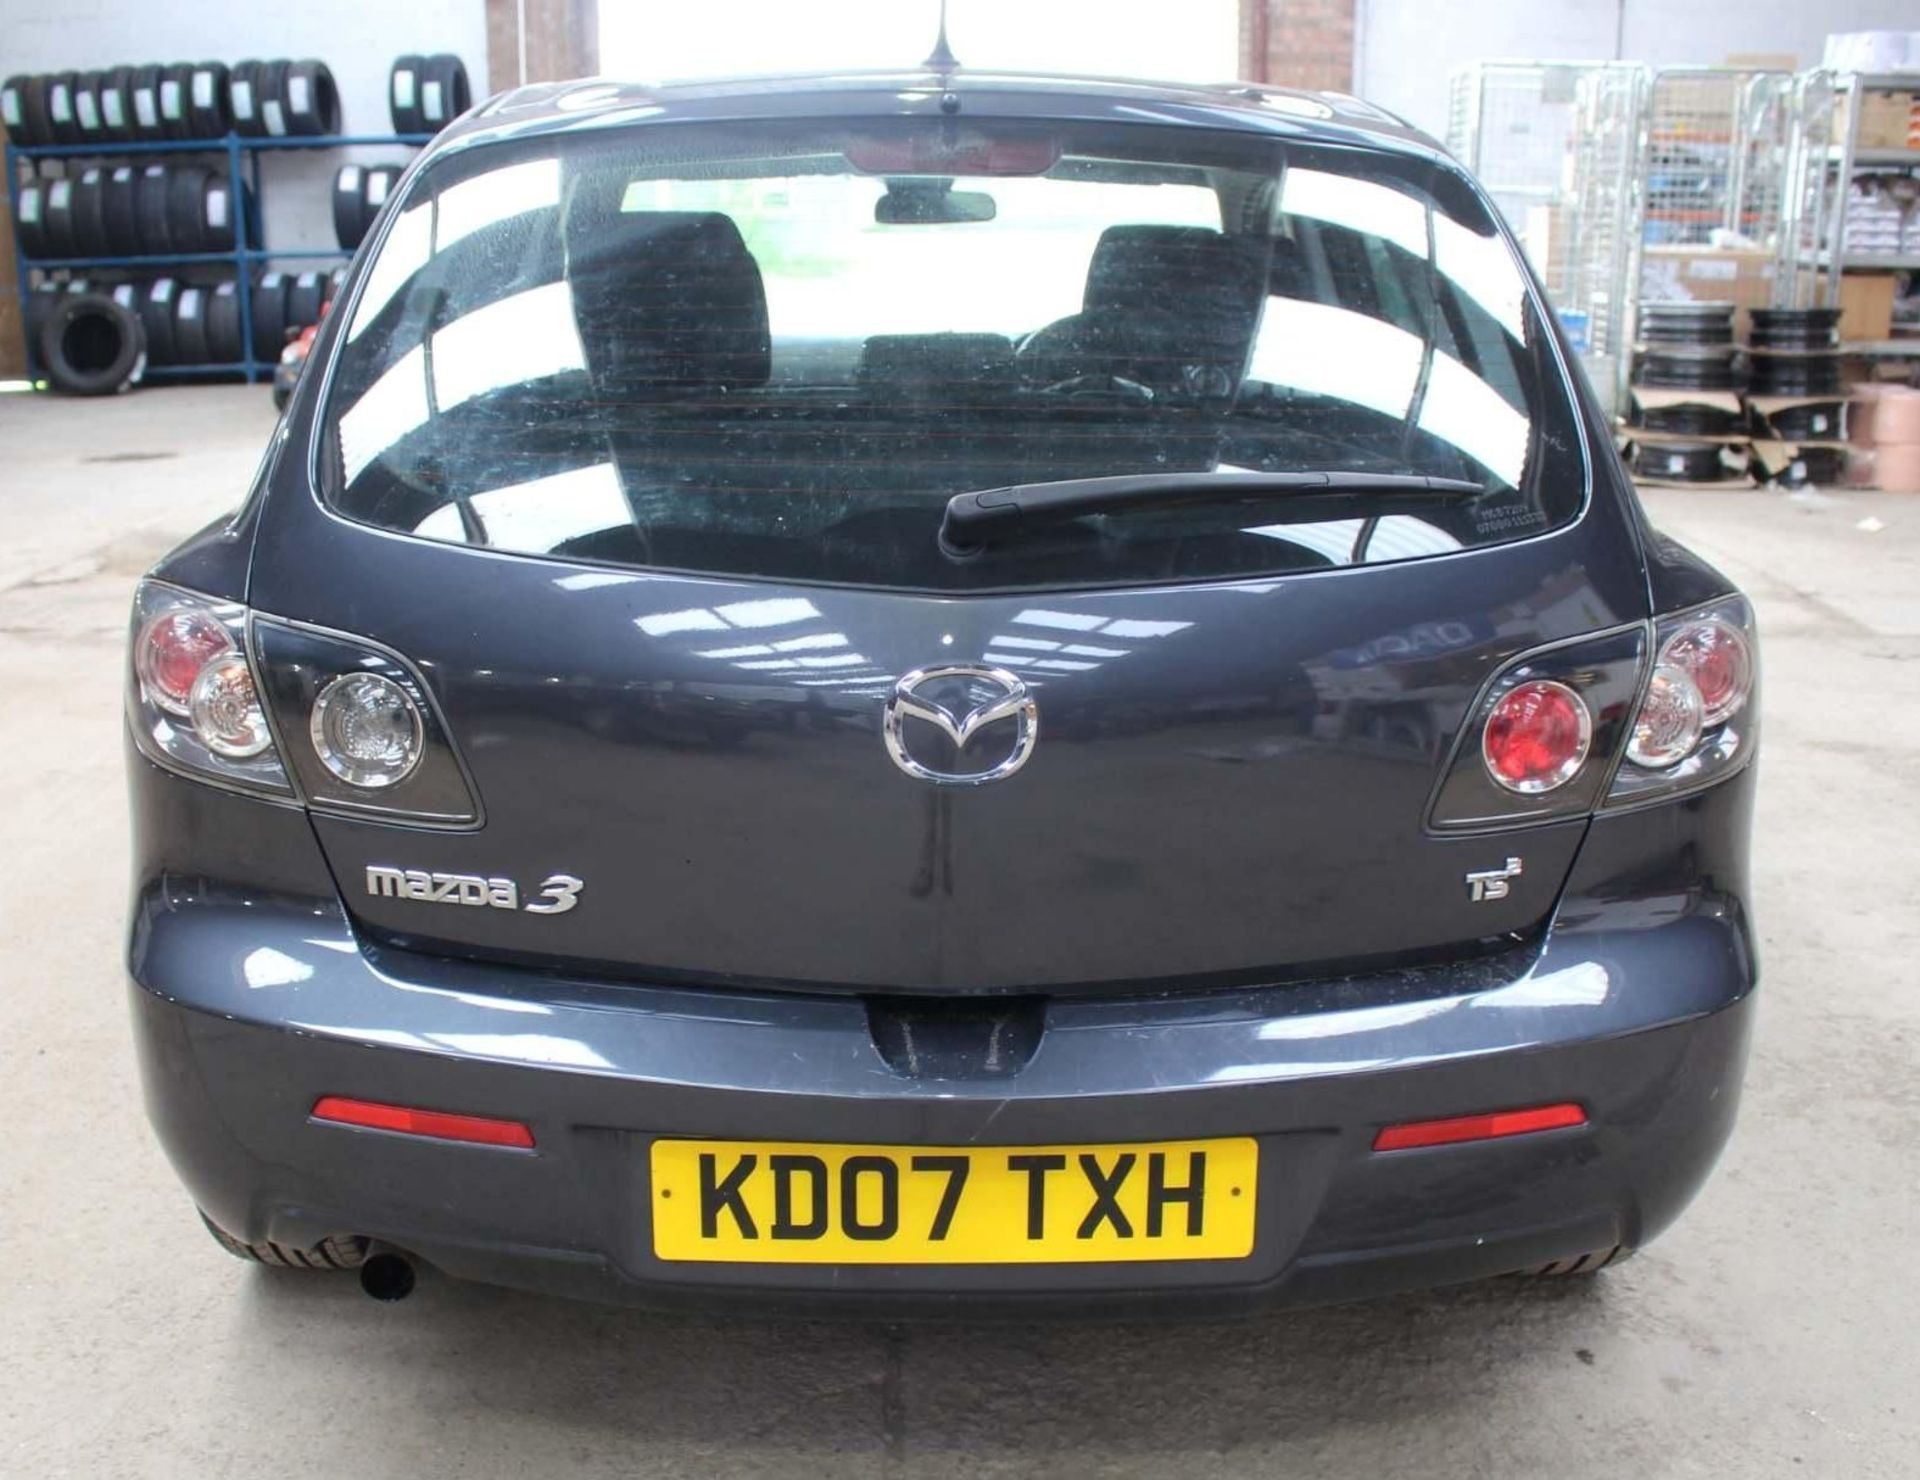 2007 Mazda3 1.6 TS2 5dr Hatchback - CL505 - NO VAT ON THE HAMMER - Location: Corby, Northamptonshire - Image 6 of 15